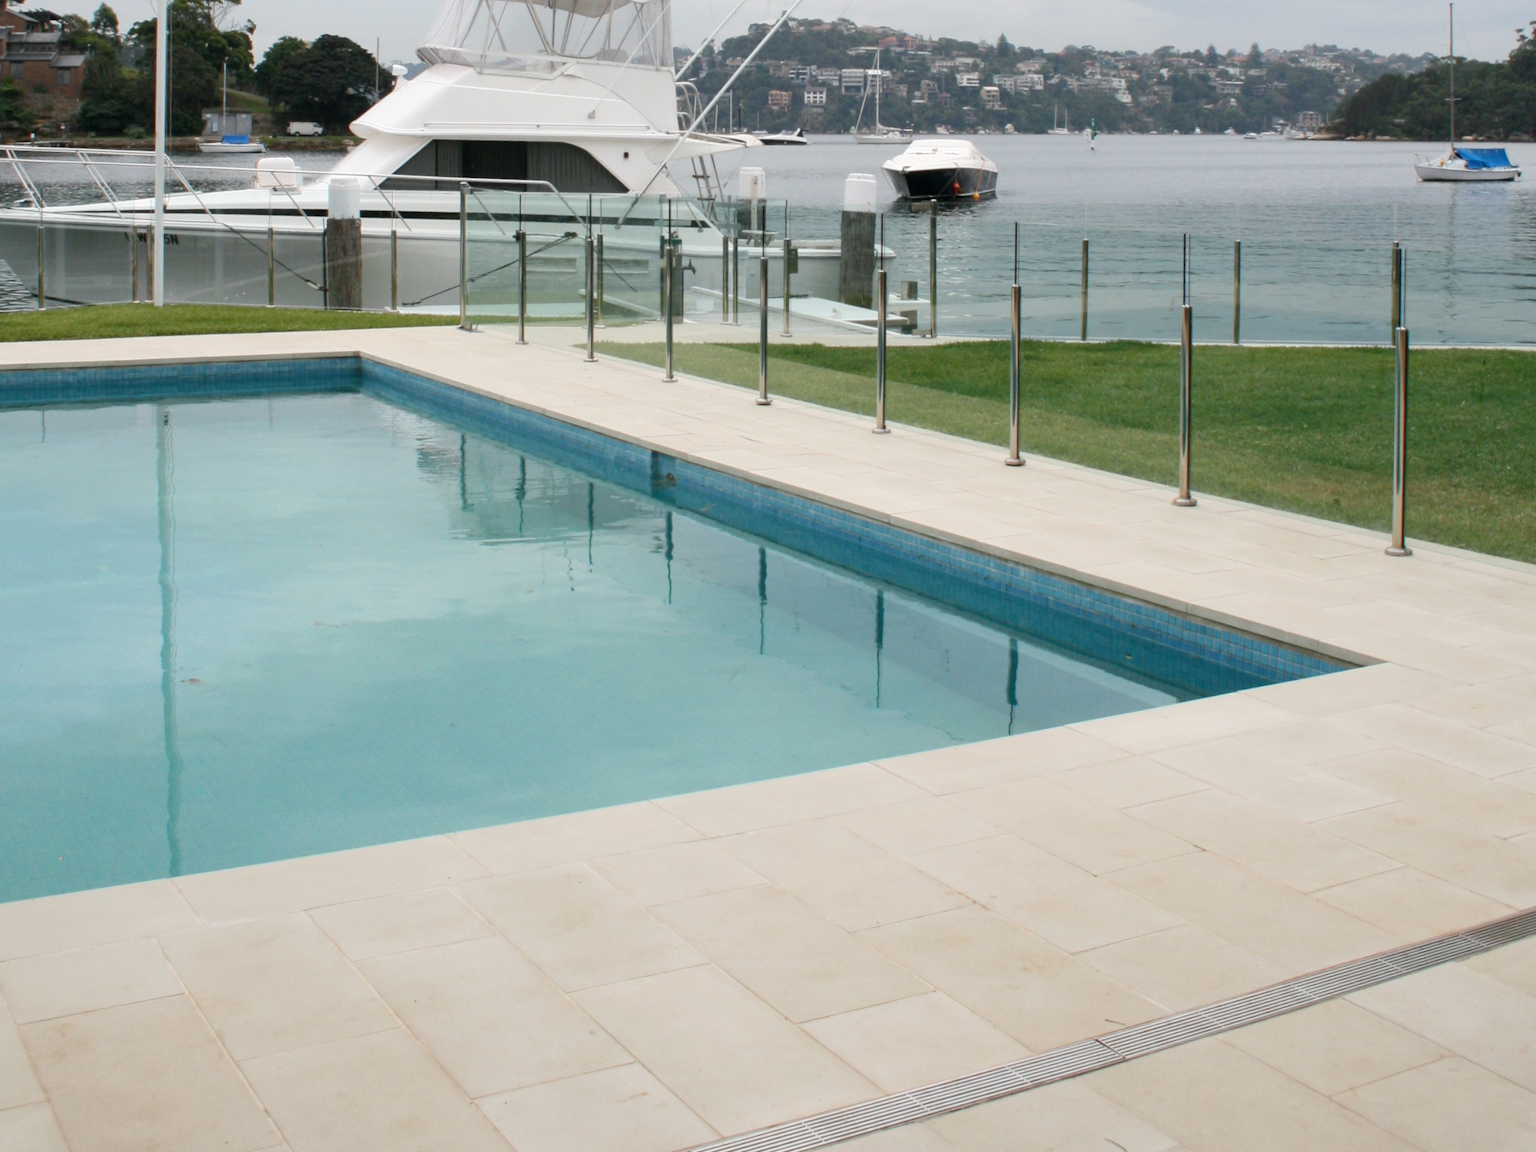 Cashmere concrete pavers and coping units used around square pool